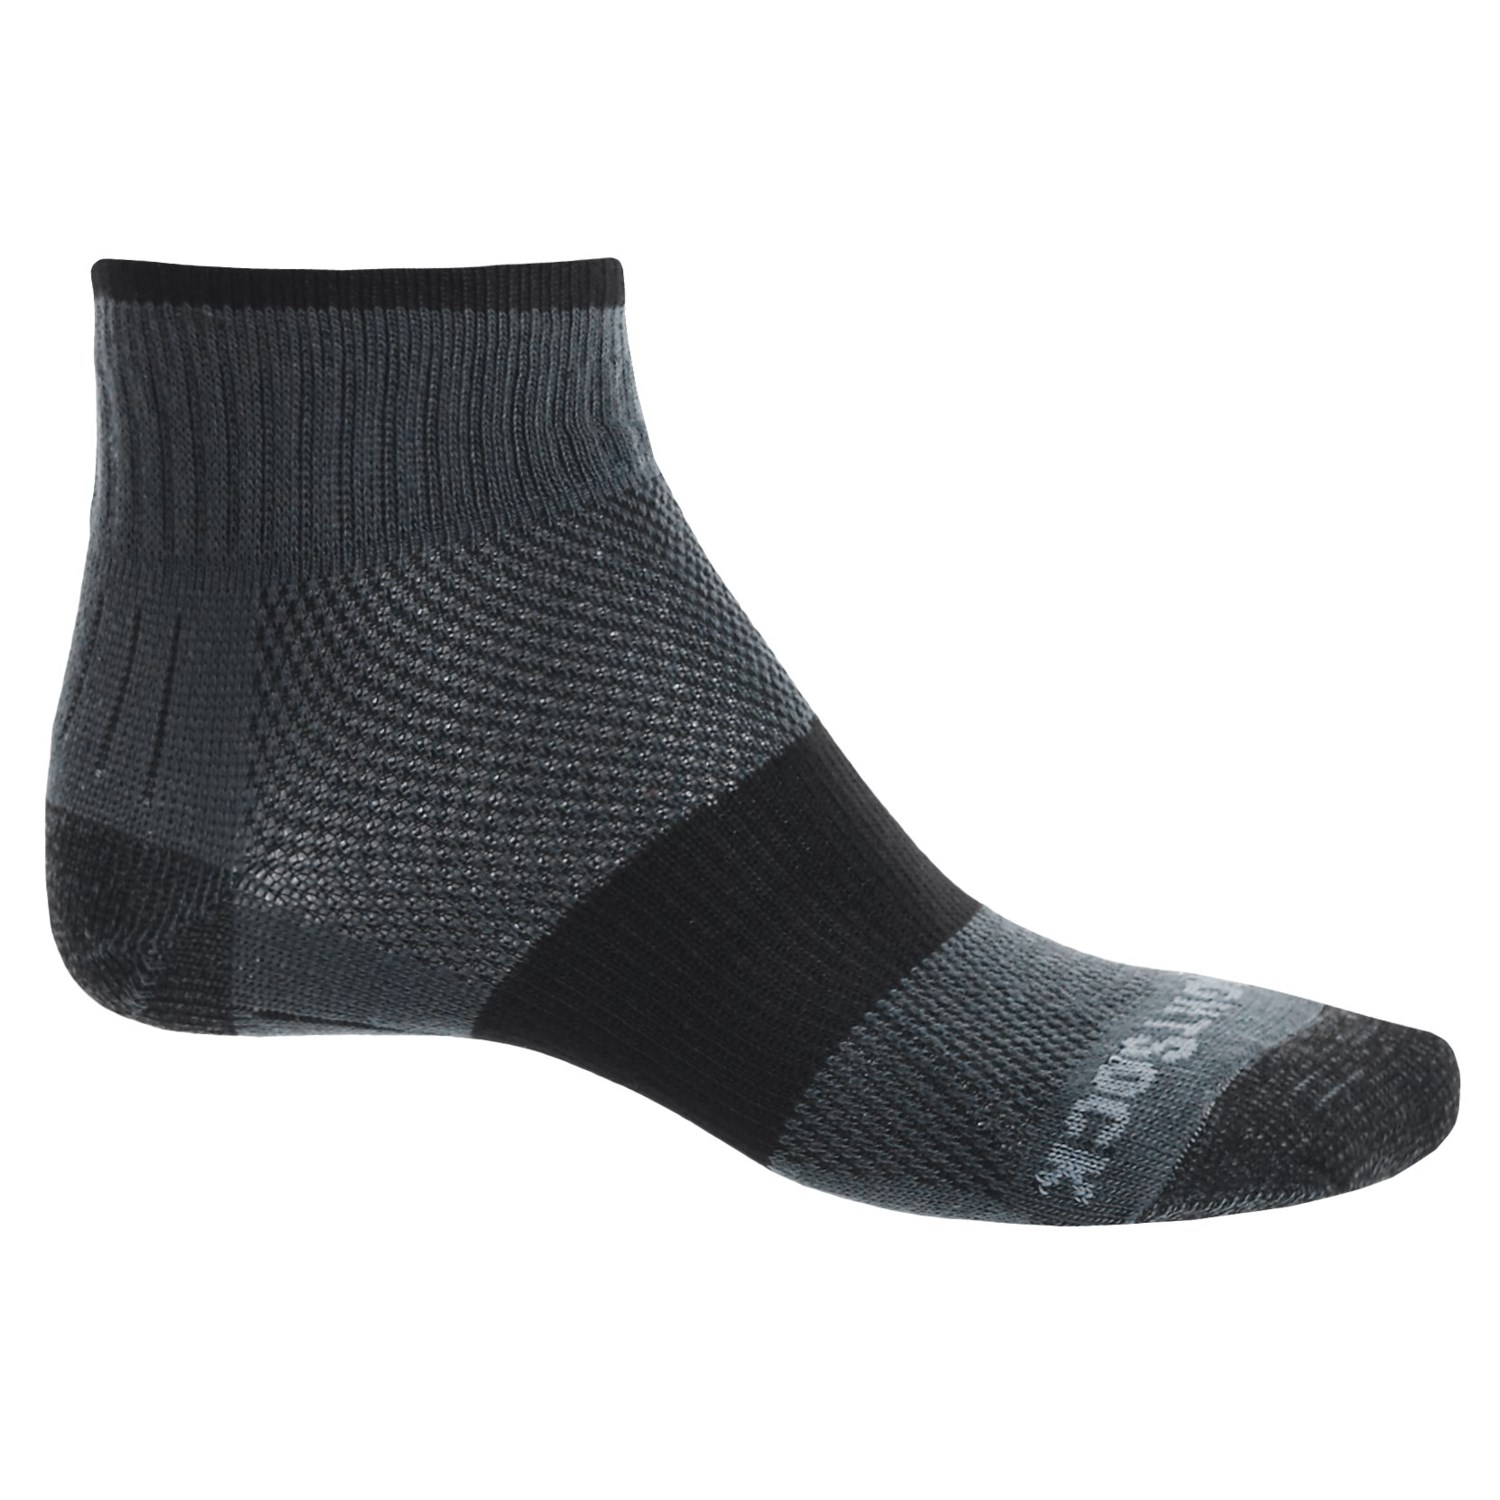 Wrightsock Escape Hiking Socks (For Men and Women) - Save 38%